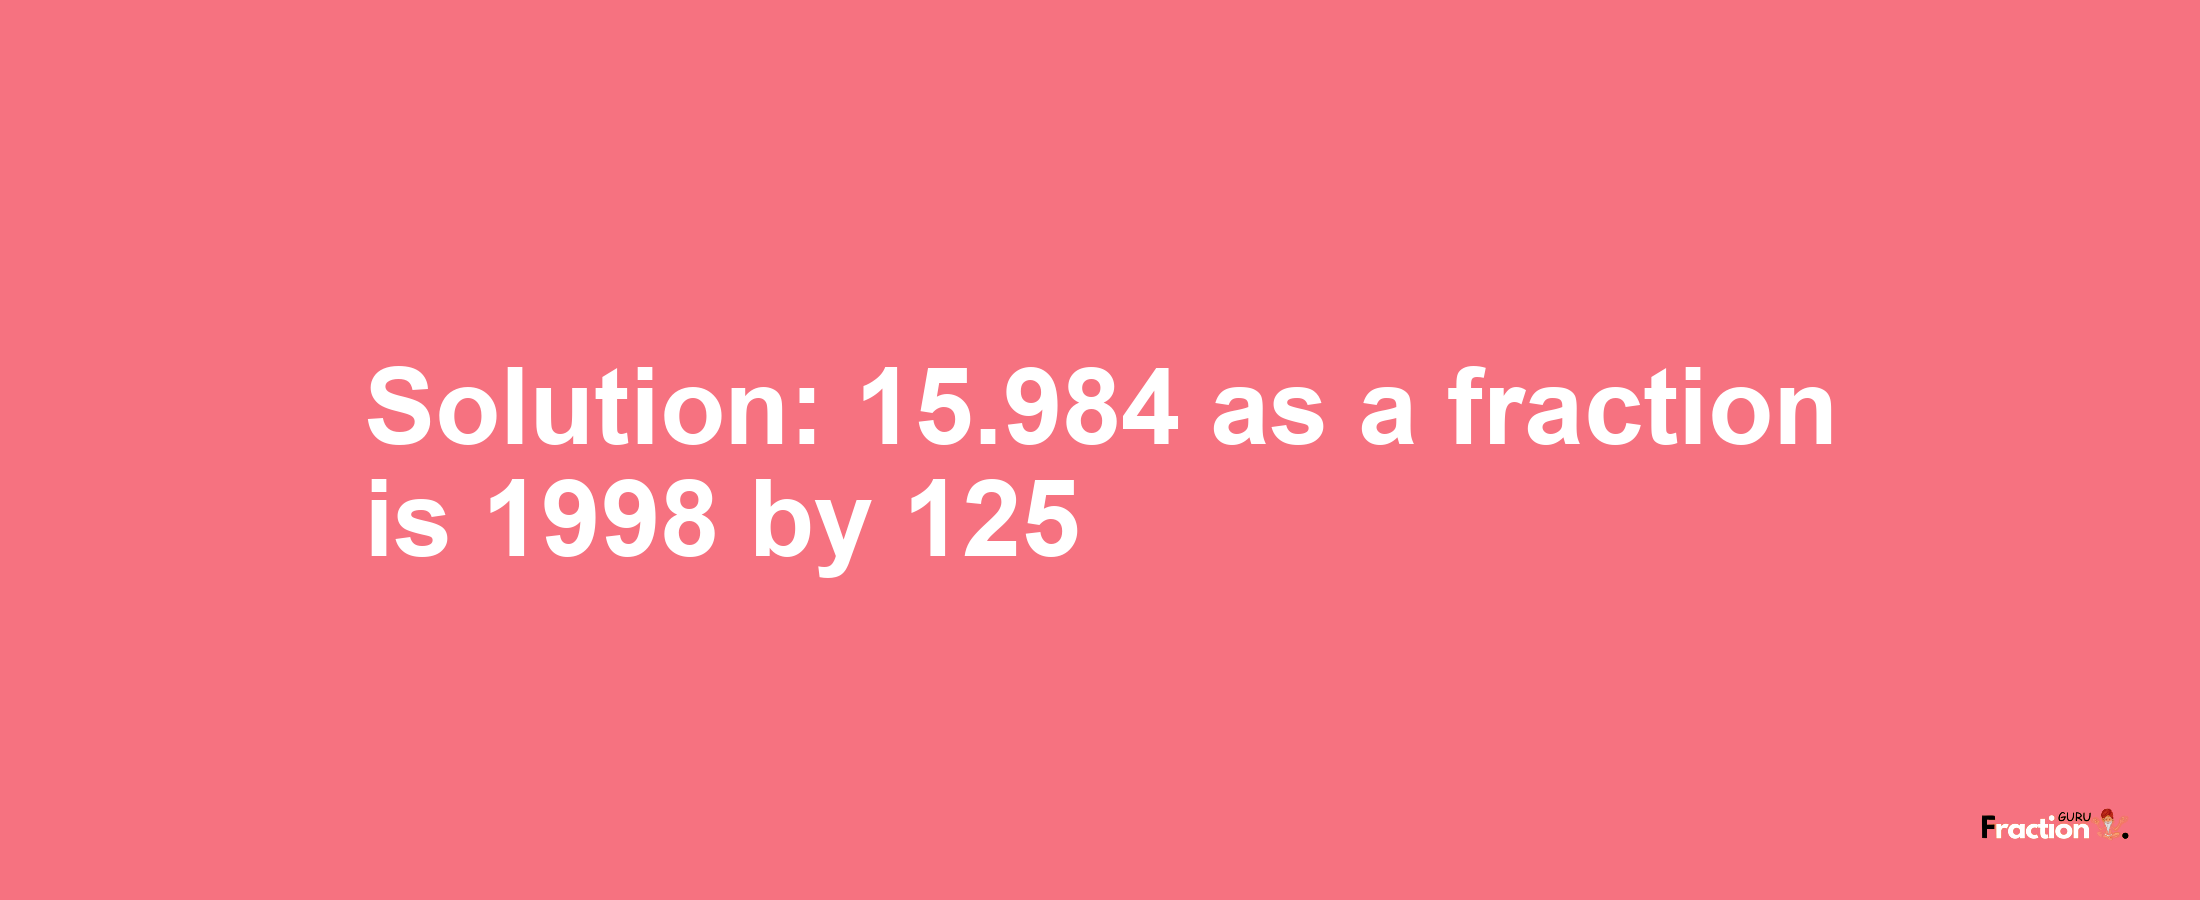 Solution:15.984 as a fraction is 1998/125